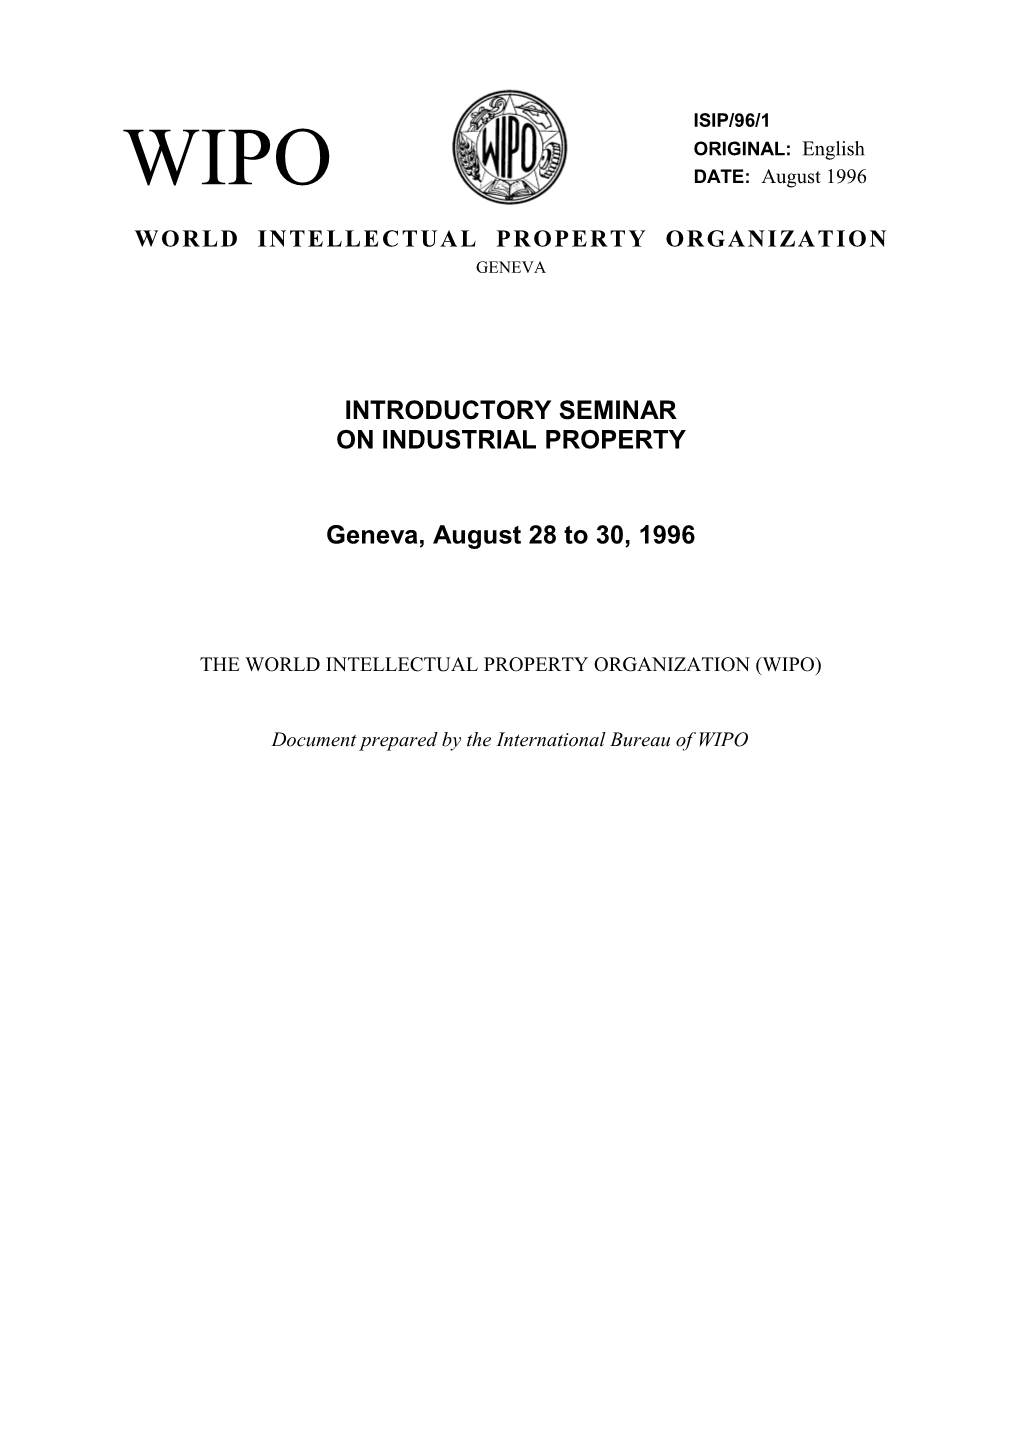 ISIP/96/1: the World Intellectual Property Organization (WIPO)